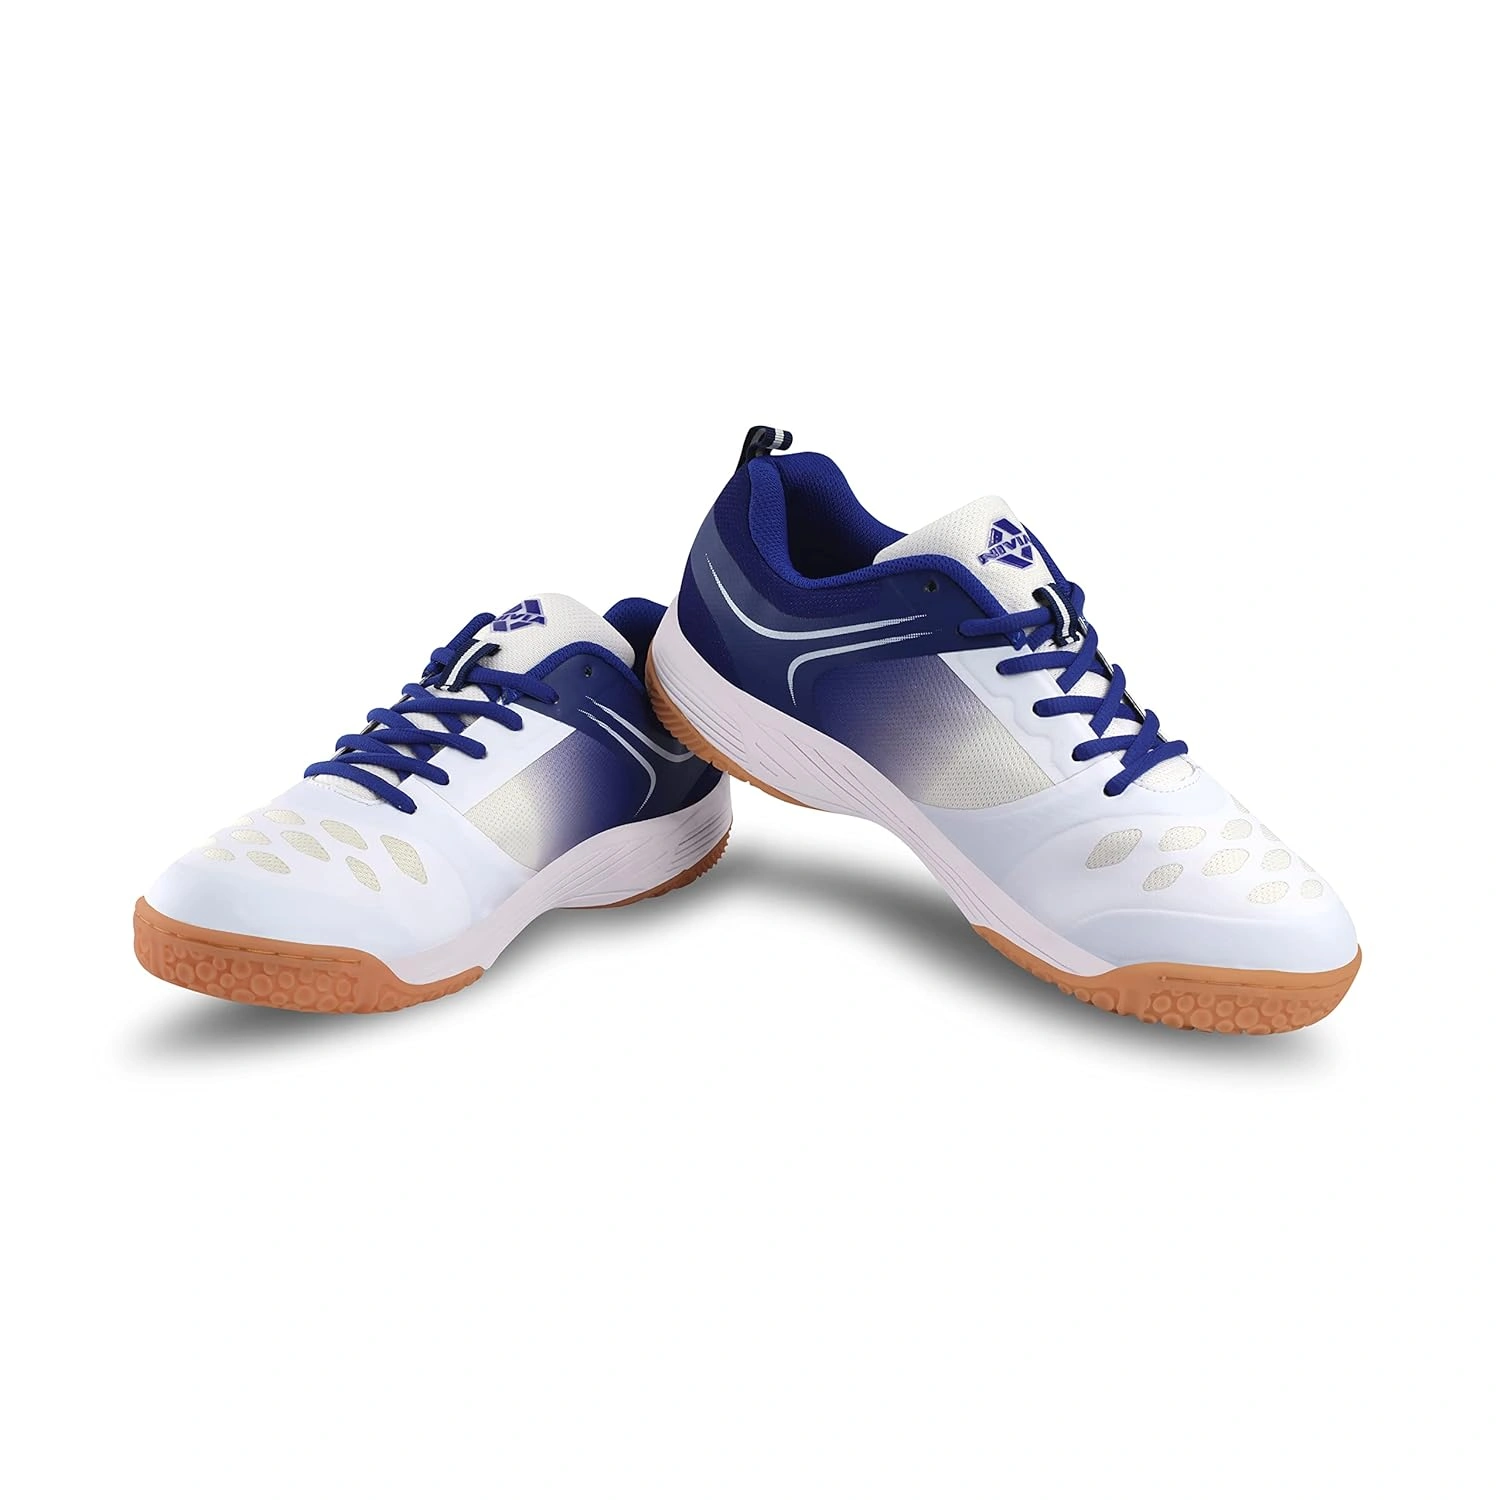 Nivia Hy-court 2.0 Badminton Shoes For Mens-WHITE-11-5